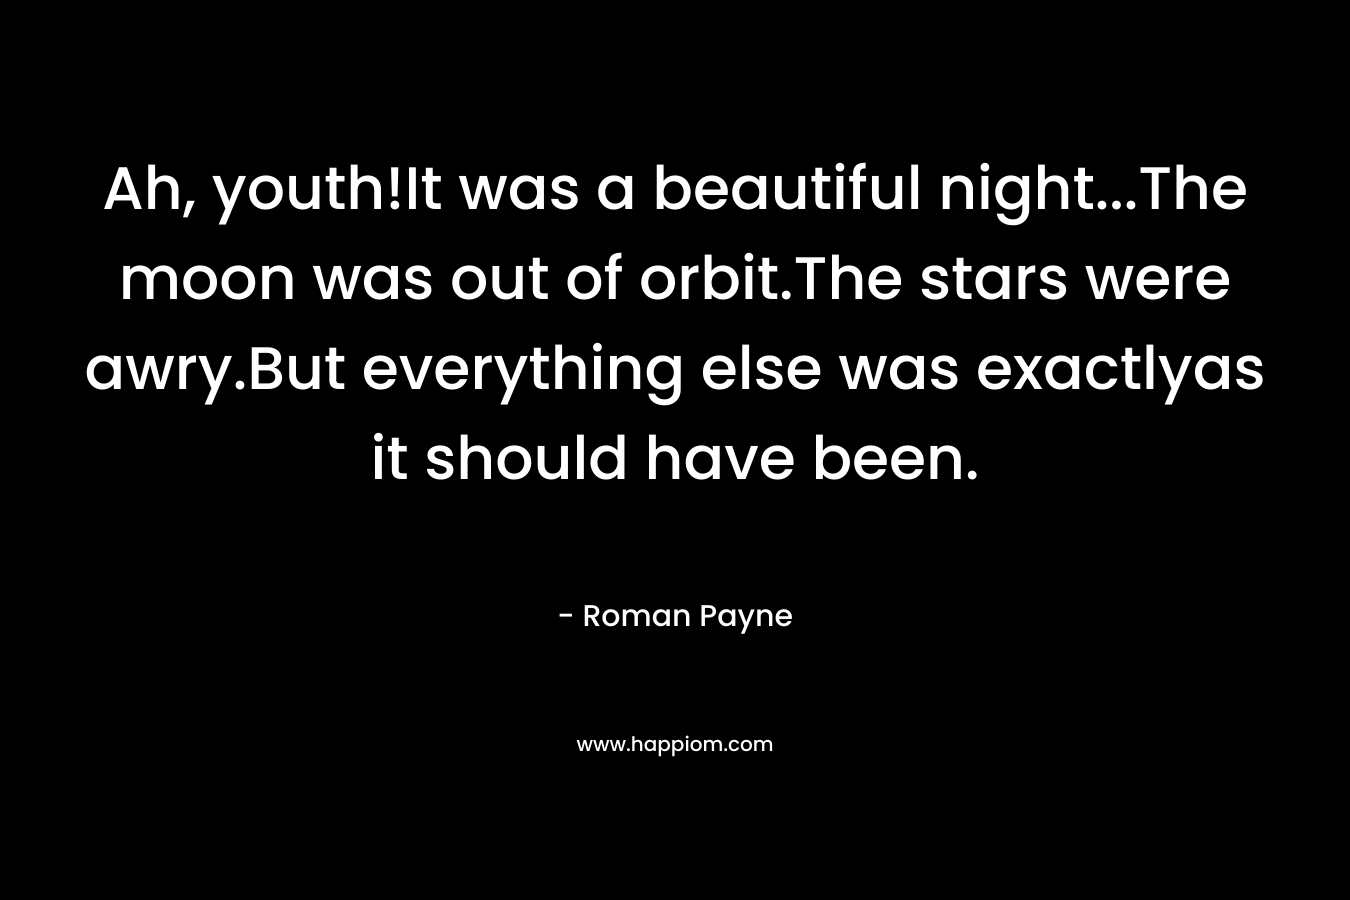 Ah, youth!It was a beautiful night...The moon was out of orbit.The stars were awry.But everything else was exactlyas it should have been.